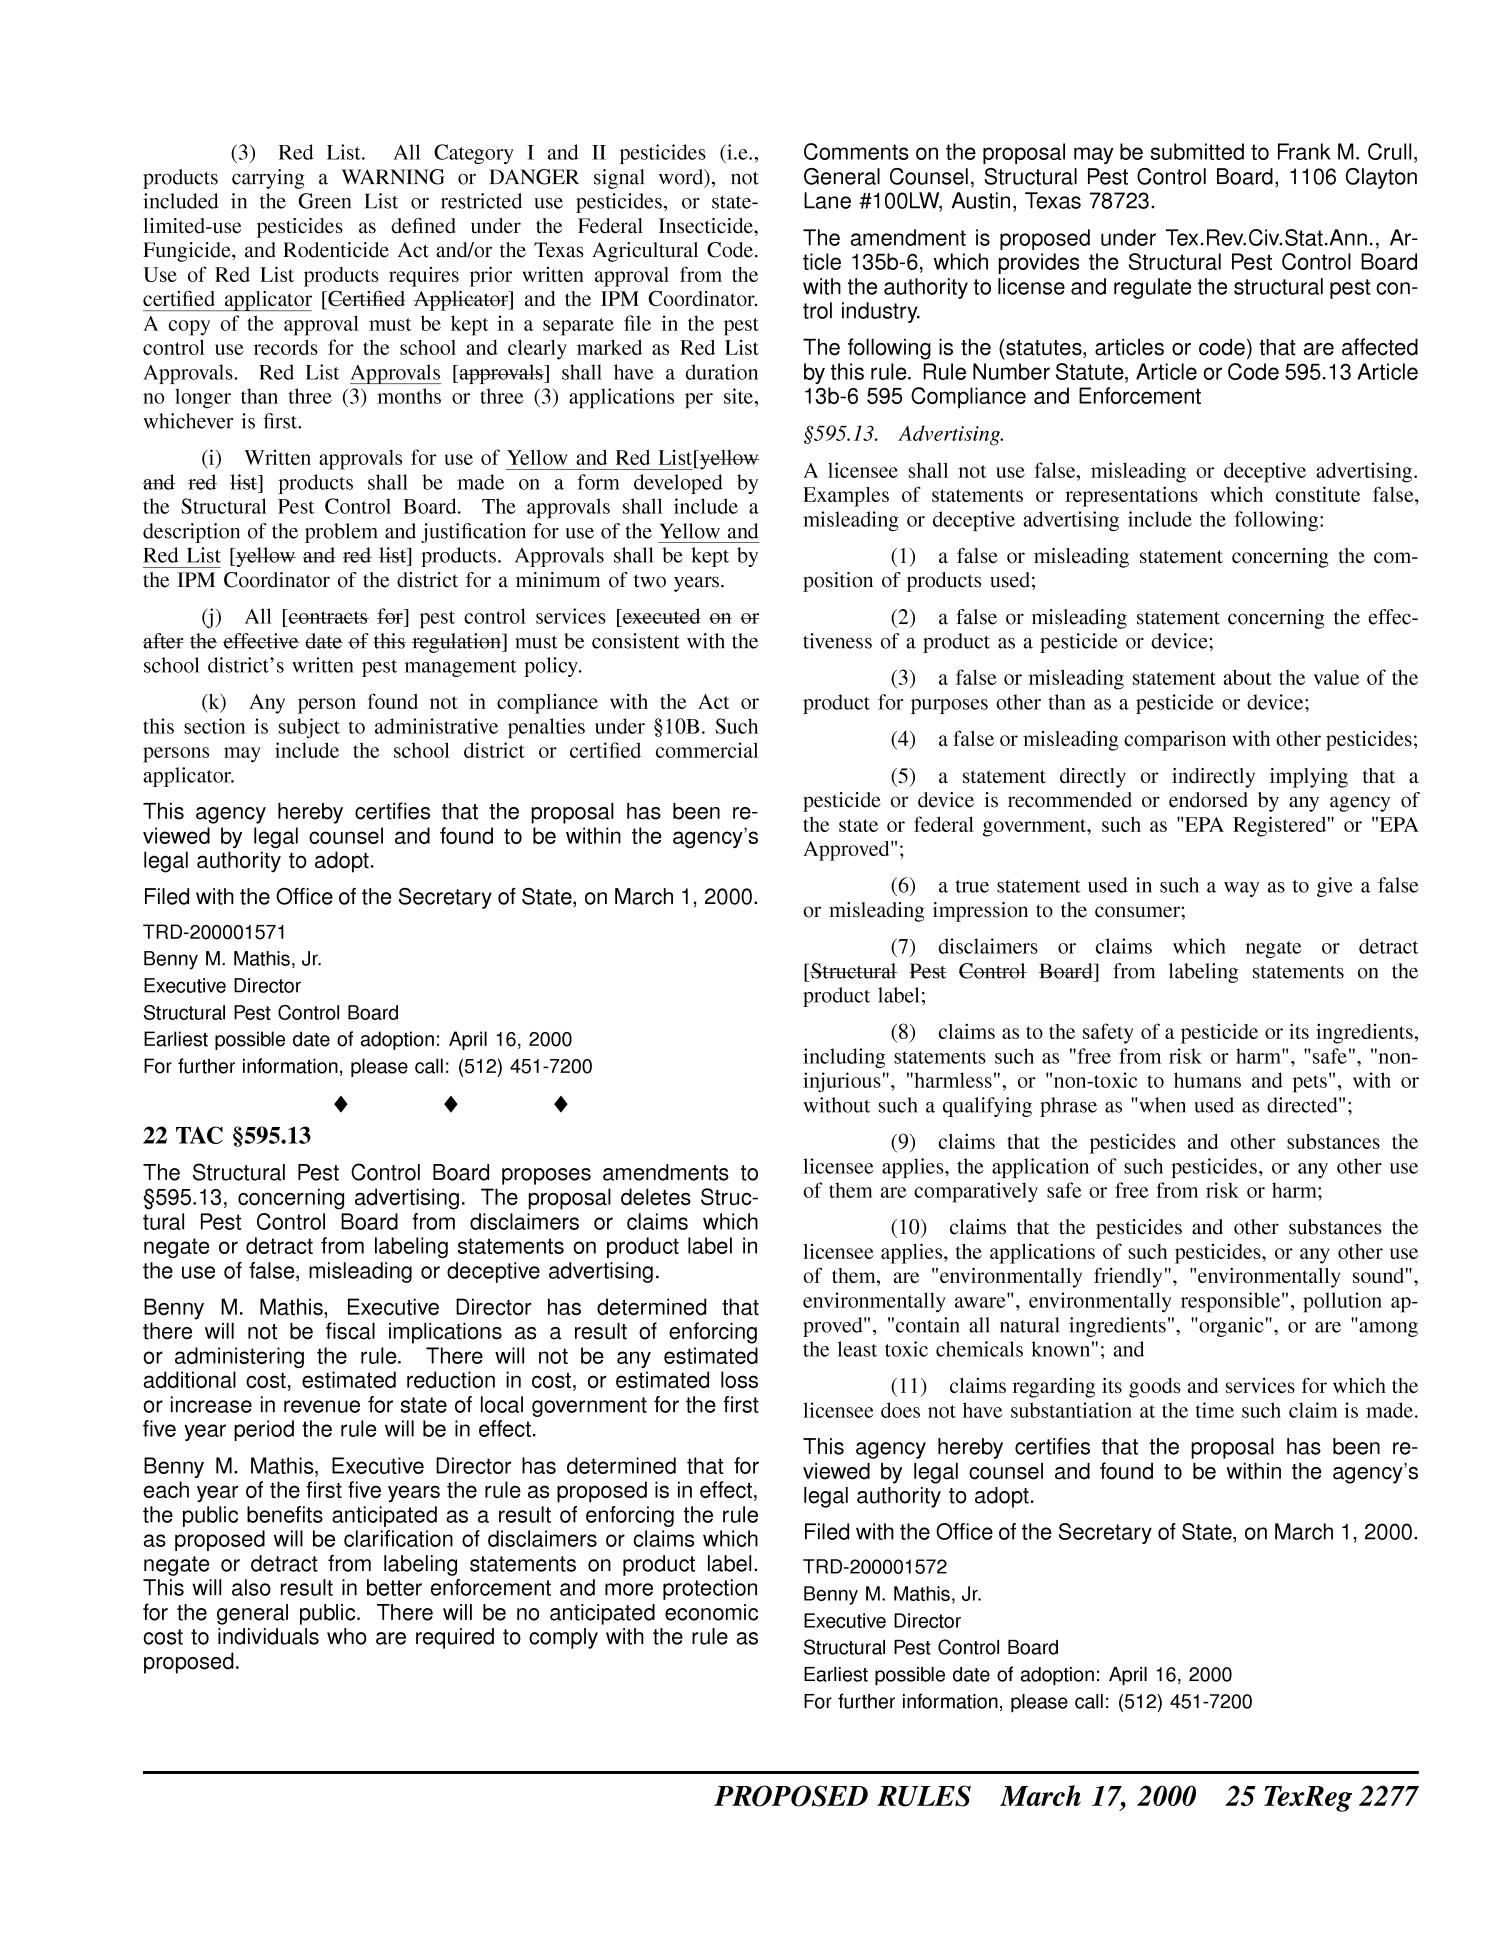 Texas Register, Volume 25, Number 11, Pages 2223-2484, March 17, 2000
                                                
                                                    2277
                                                